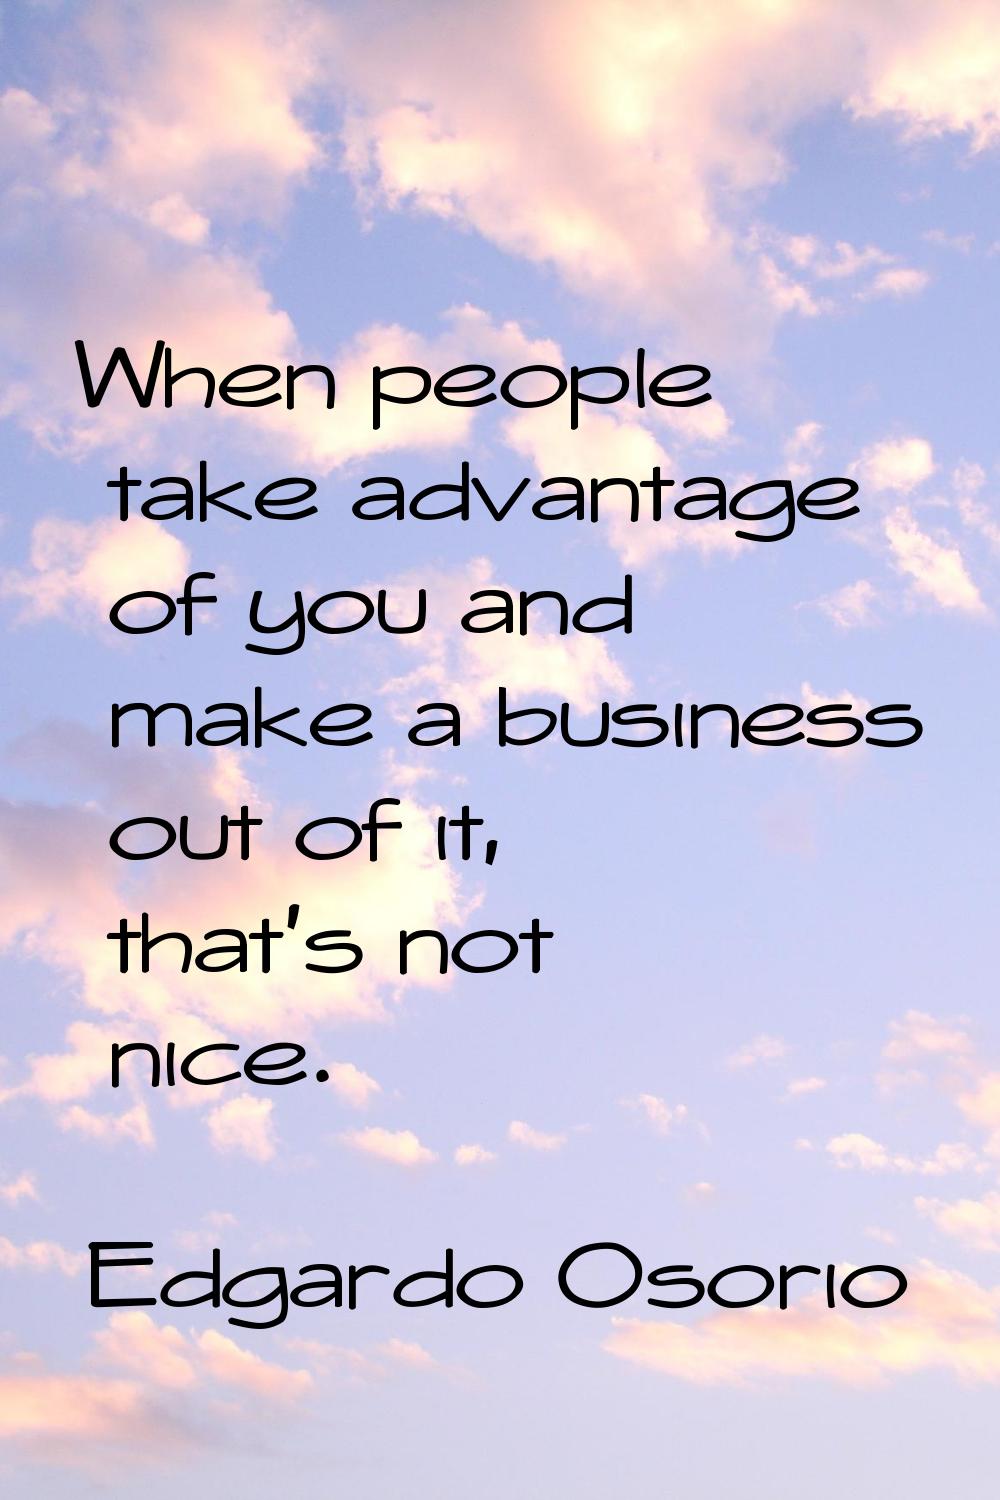 When people take advantage of you and make a business out of it, that's not nice.